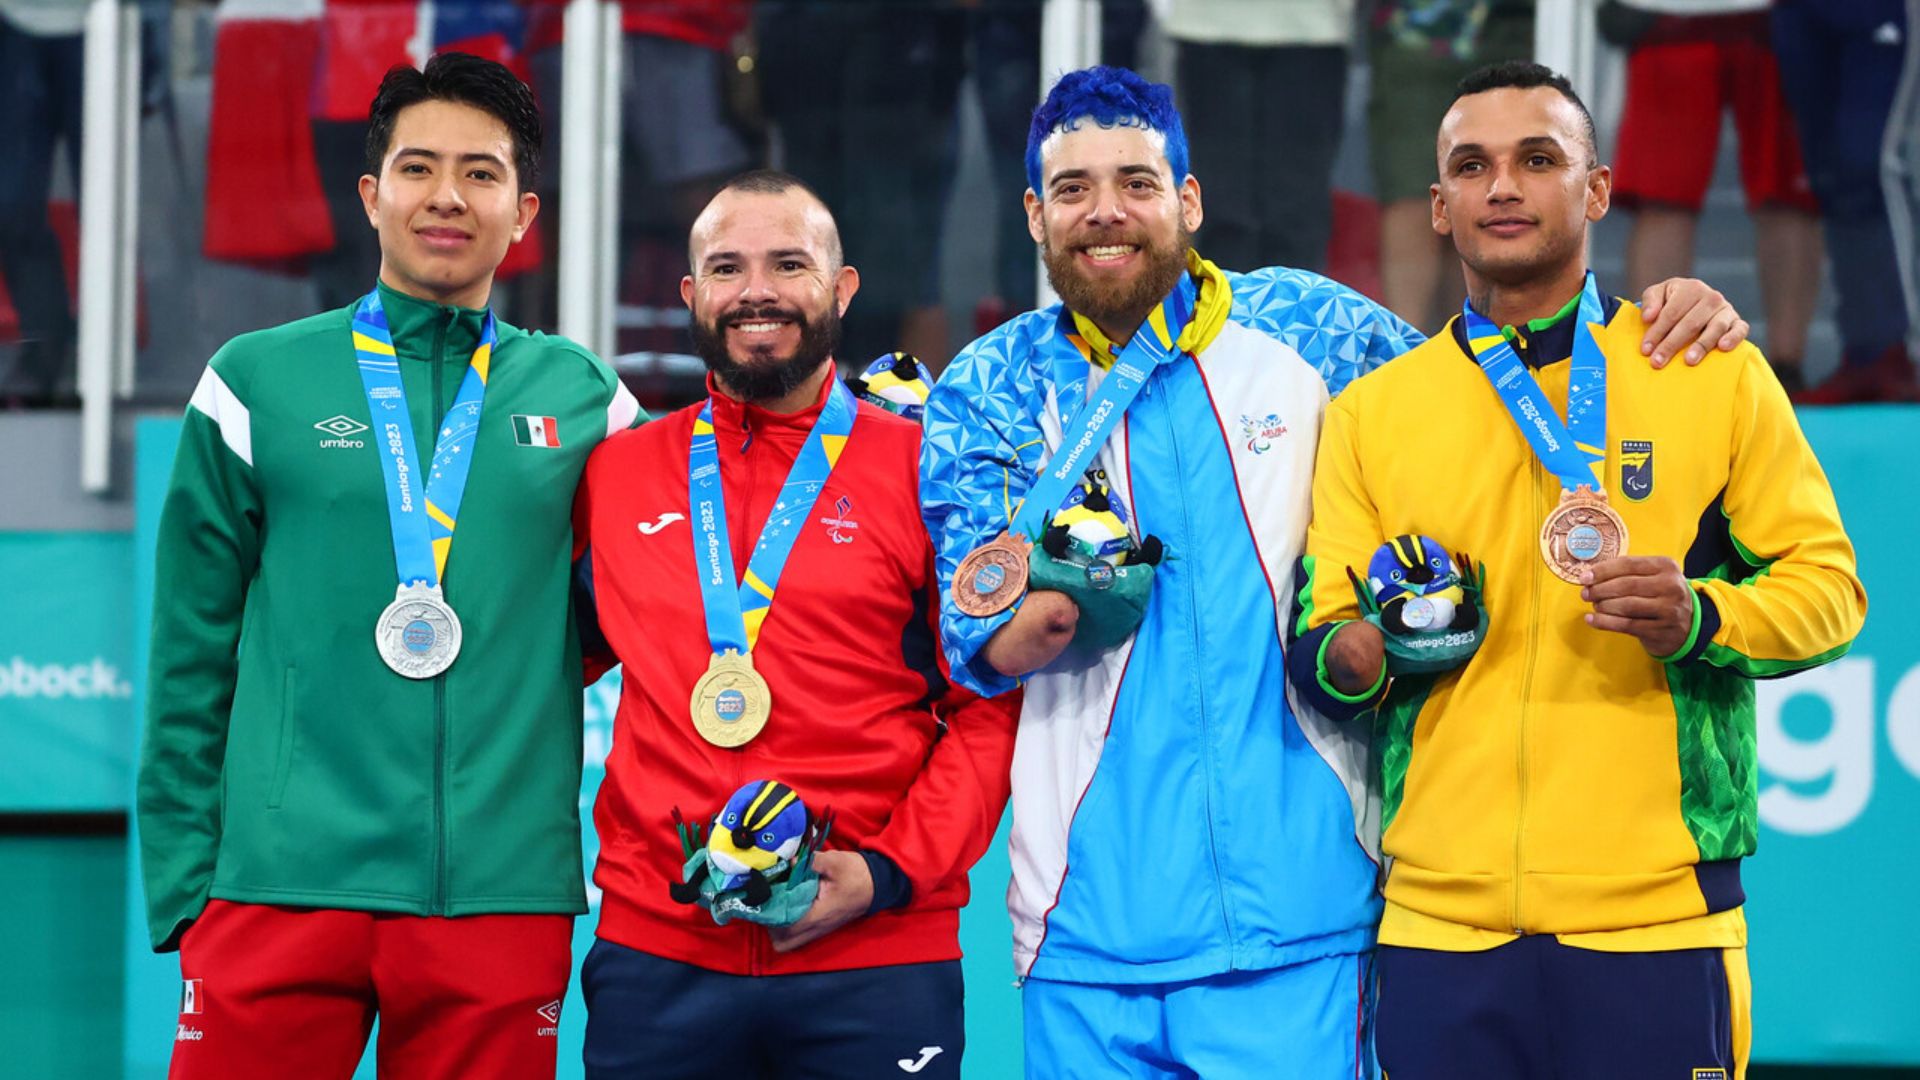 Para Taekwondo Closes With Golds for Mexico, the USA, and Costa Rica